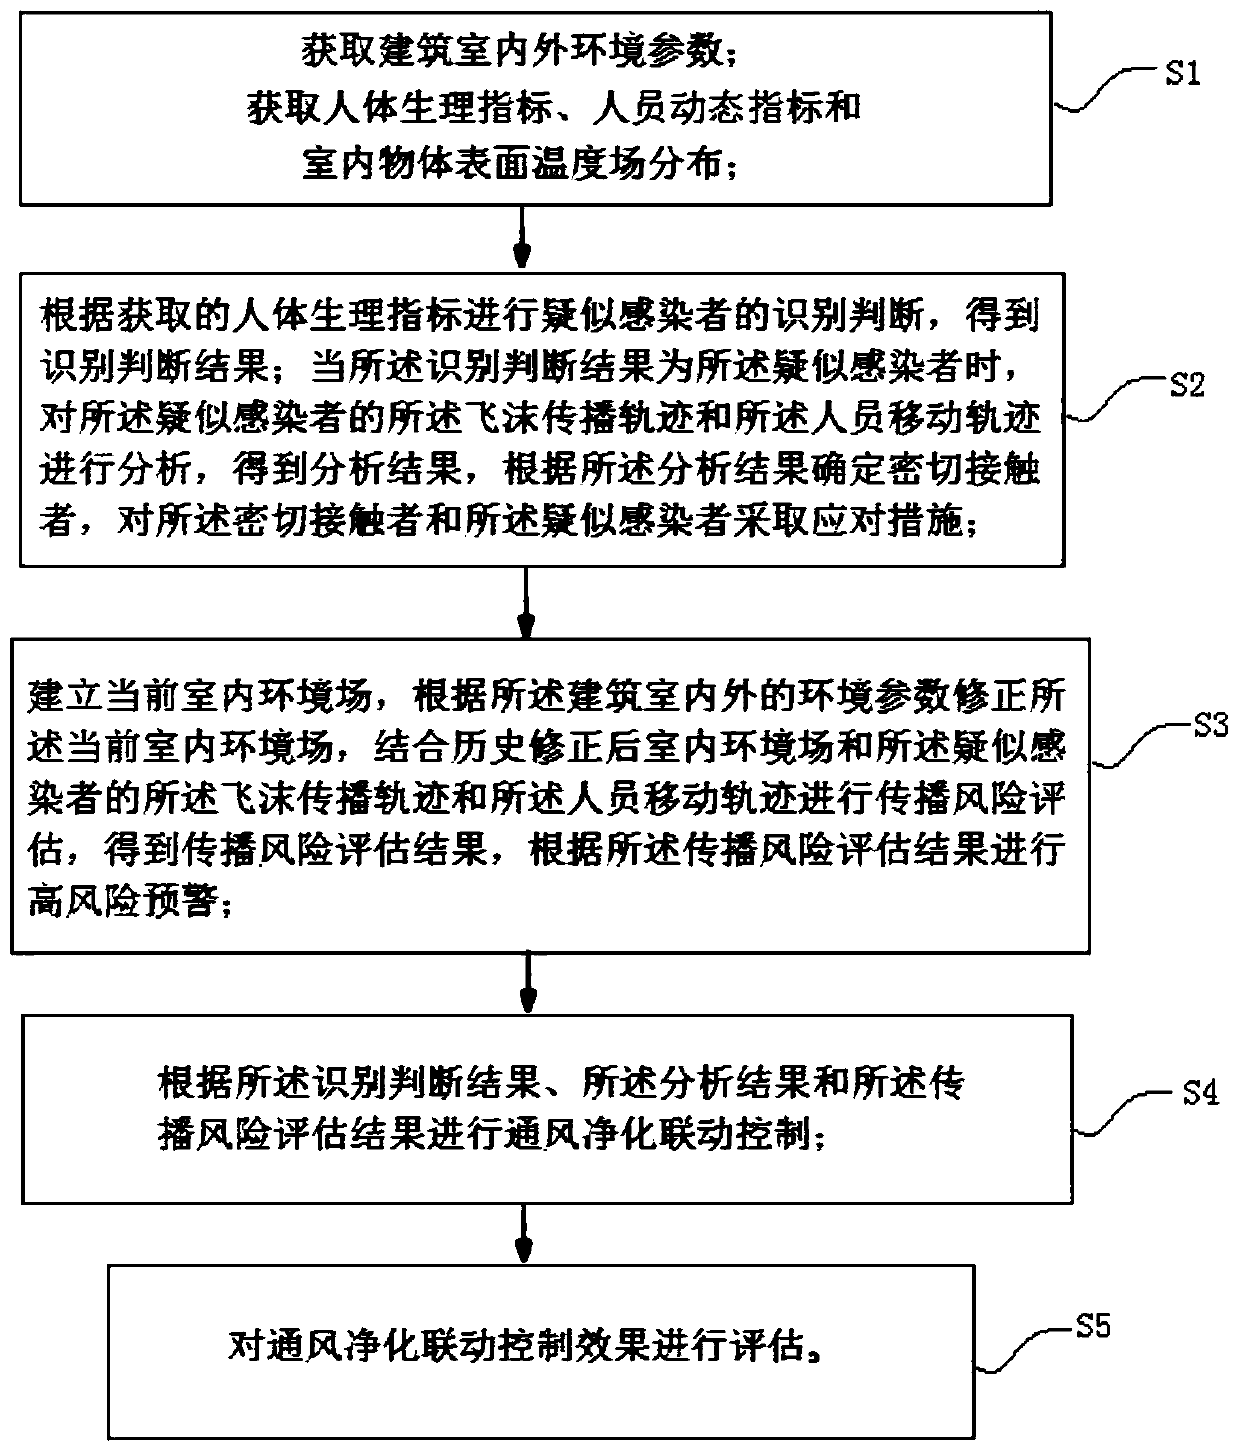 Monitoring, tracing and early warning regulation and control system and method for virus transmission in a building